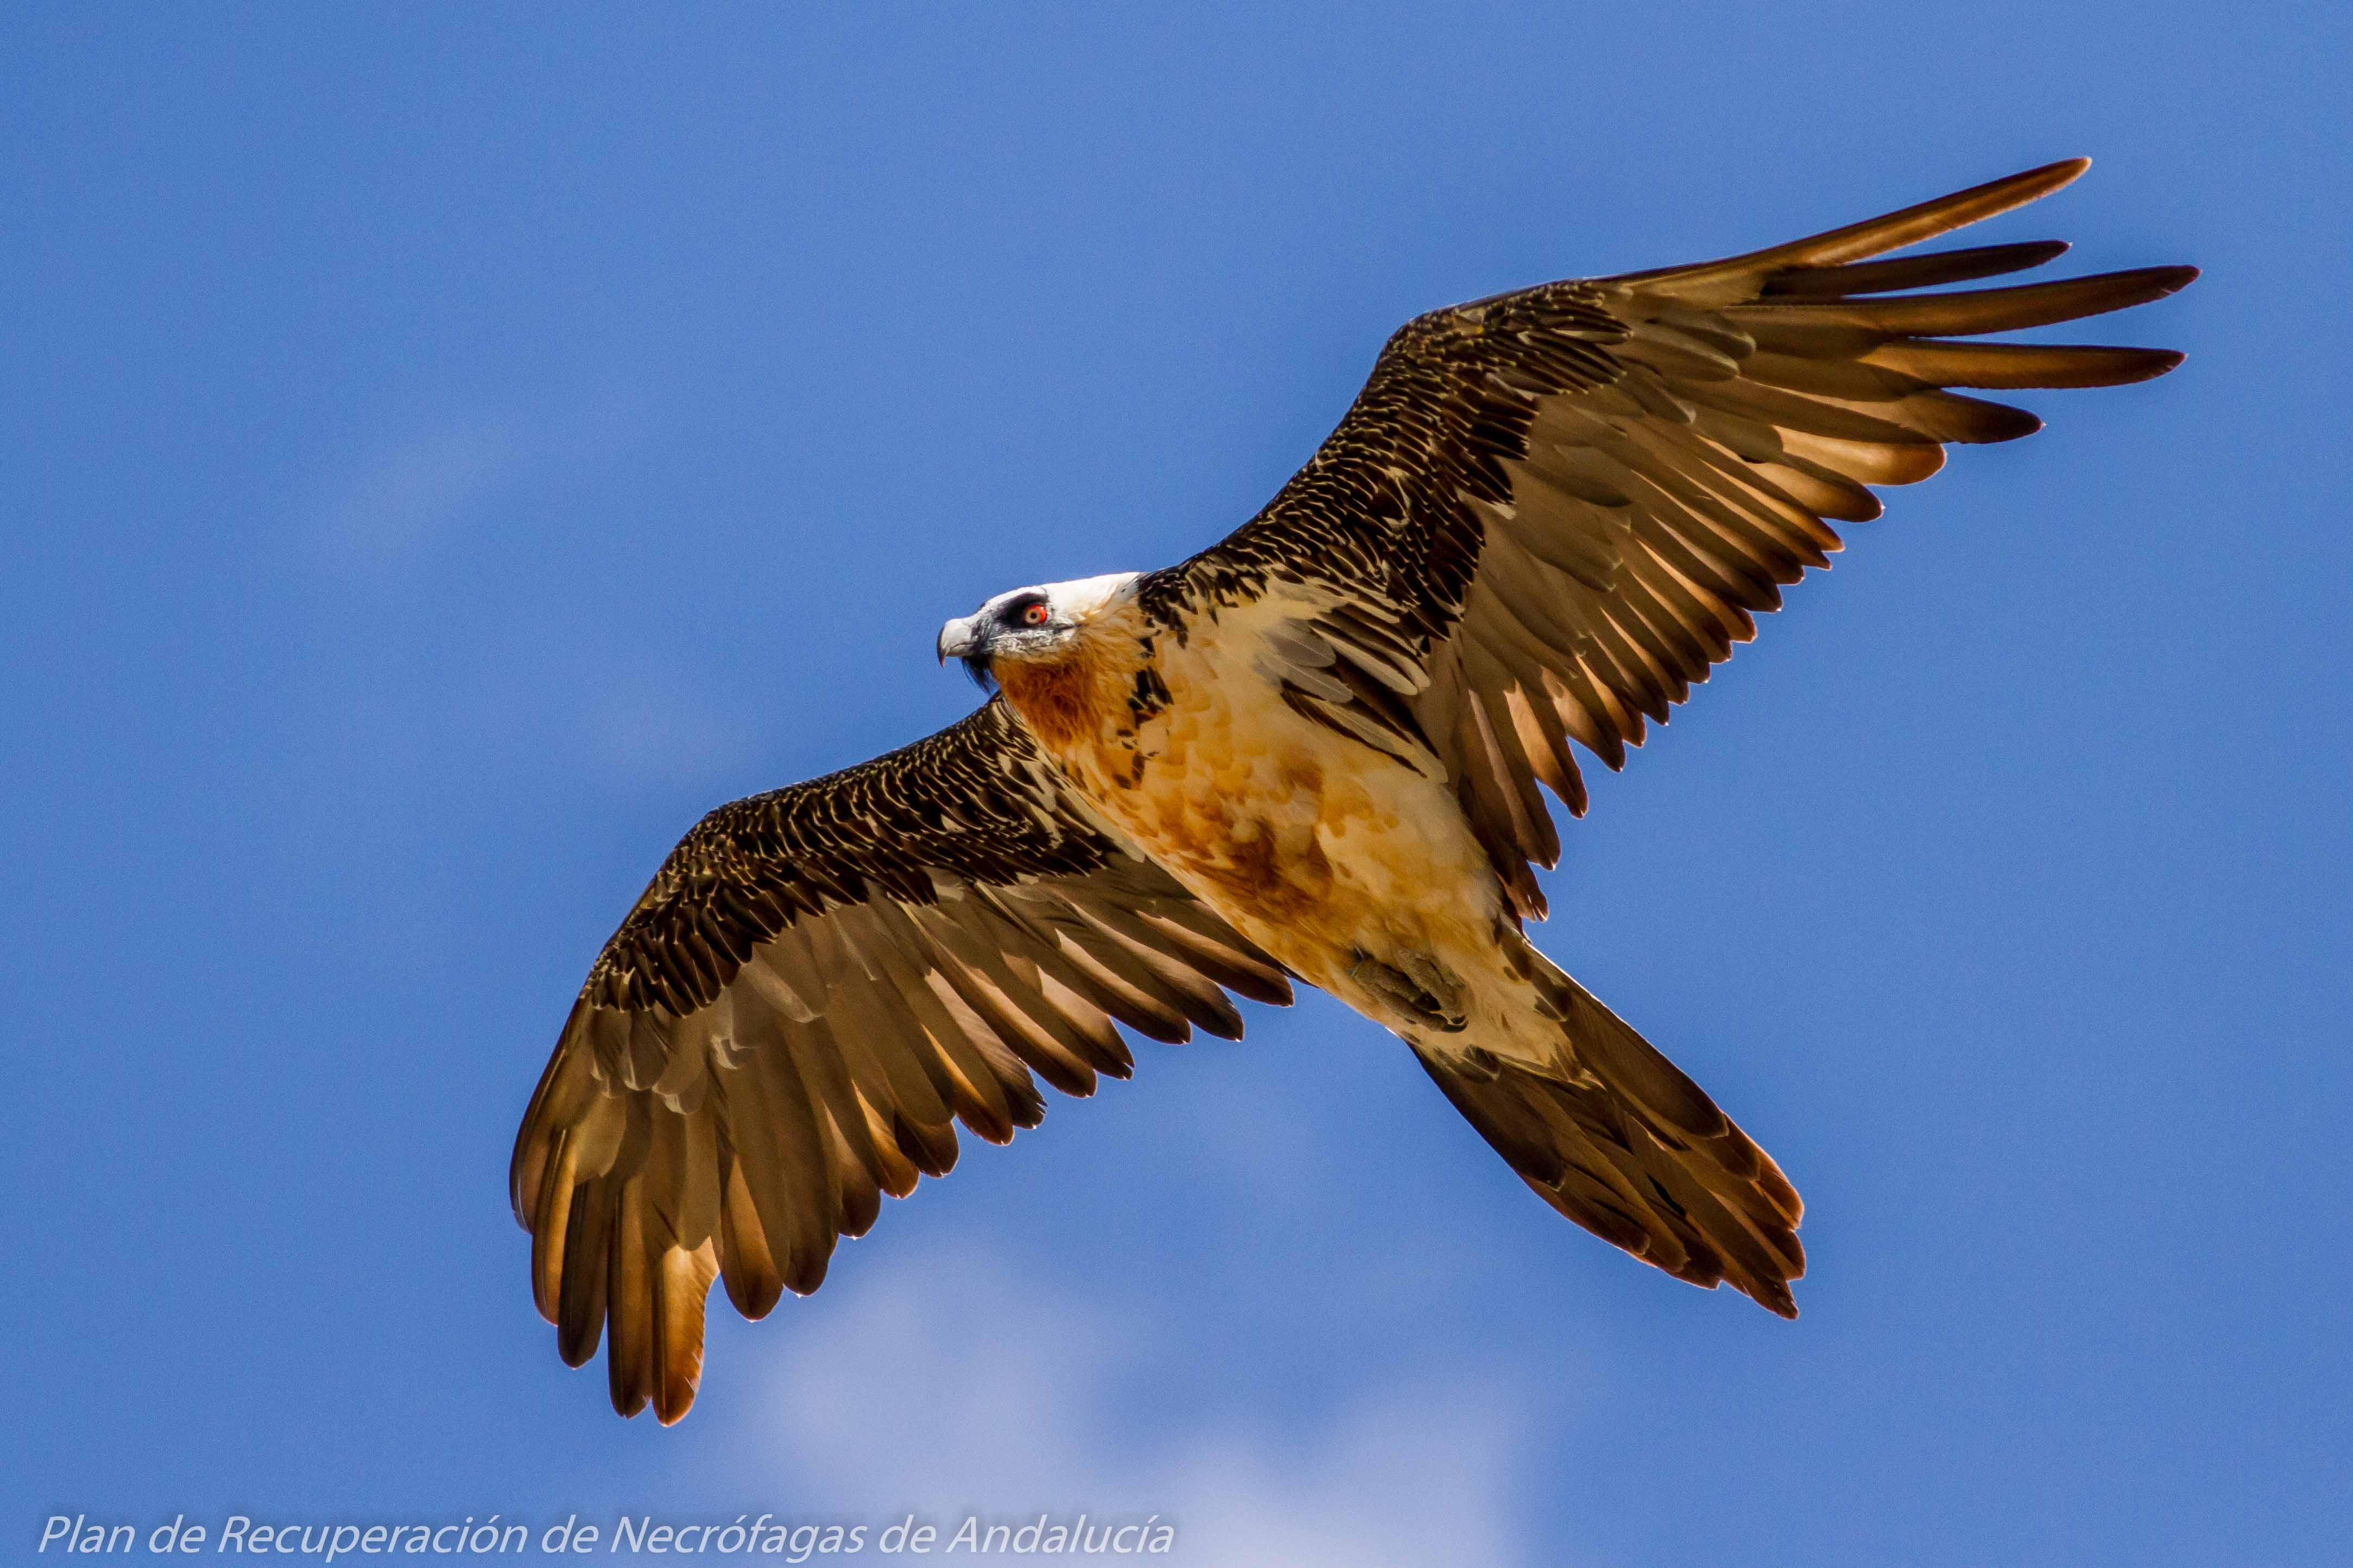 Half of raptors breeding in North Africa are threatened with extinction –  IUCN report